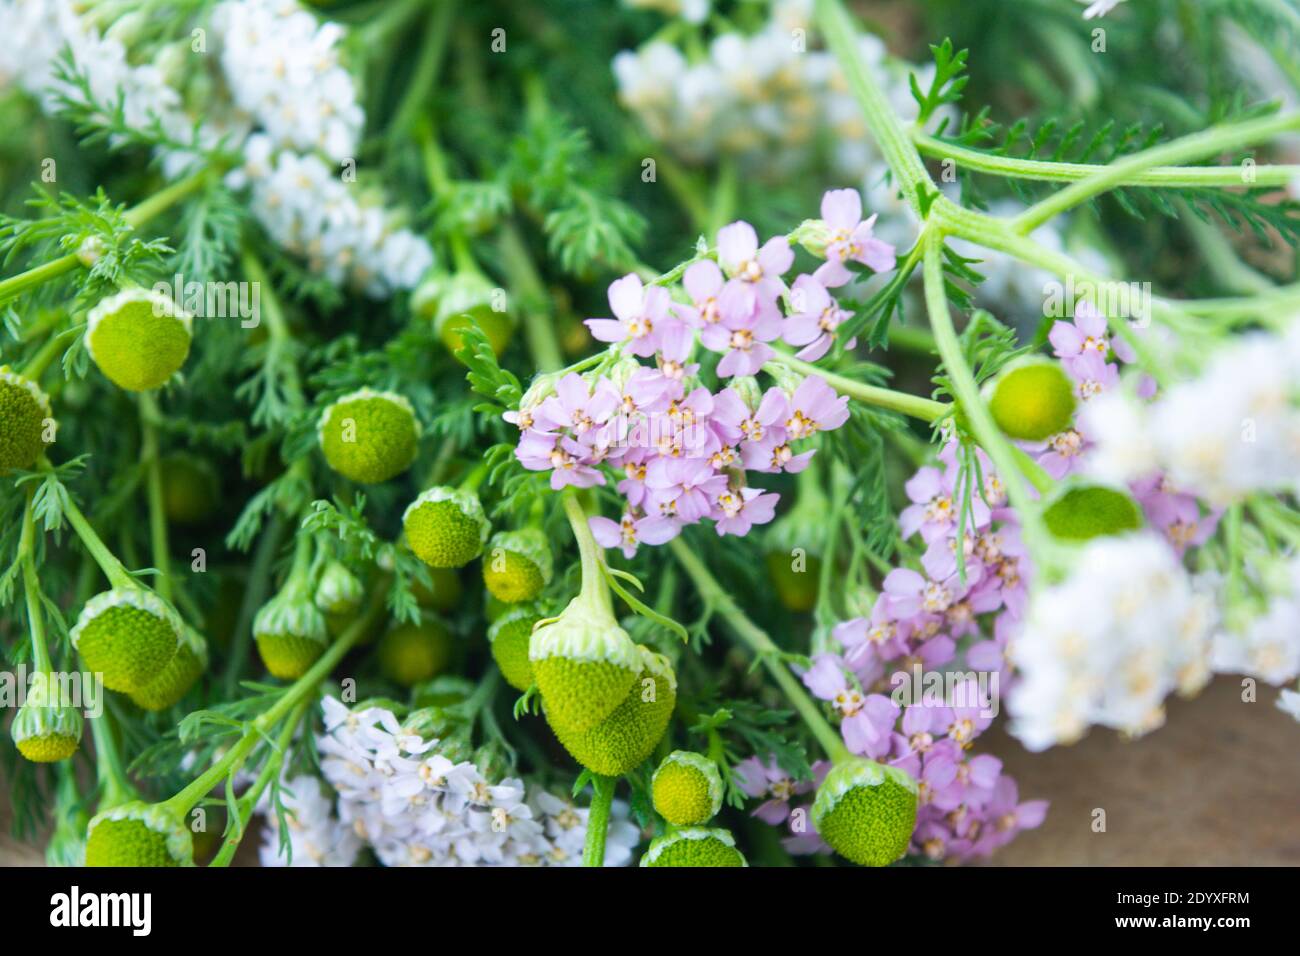 Meadow medical herbs - Chamomile and Achillea closeup view. Alternative medicine herbal grass Stock Photo